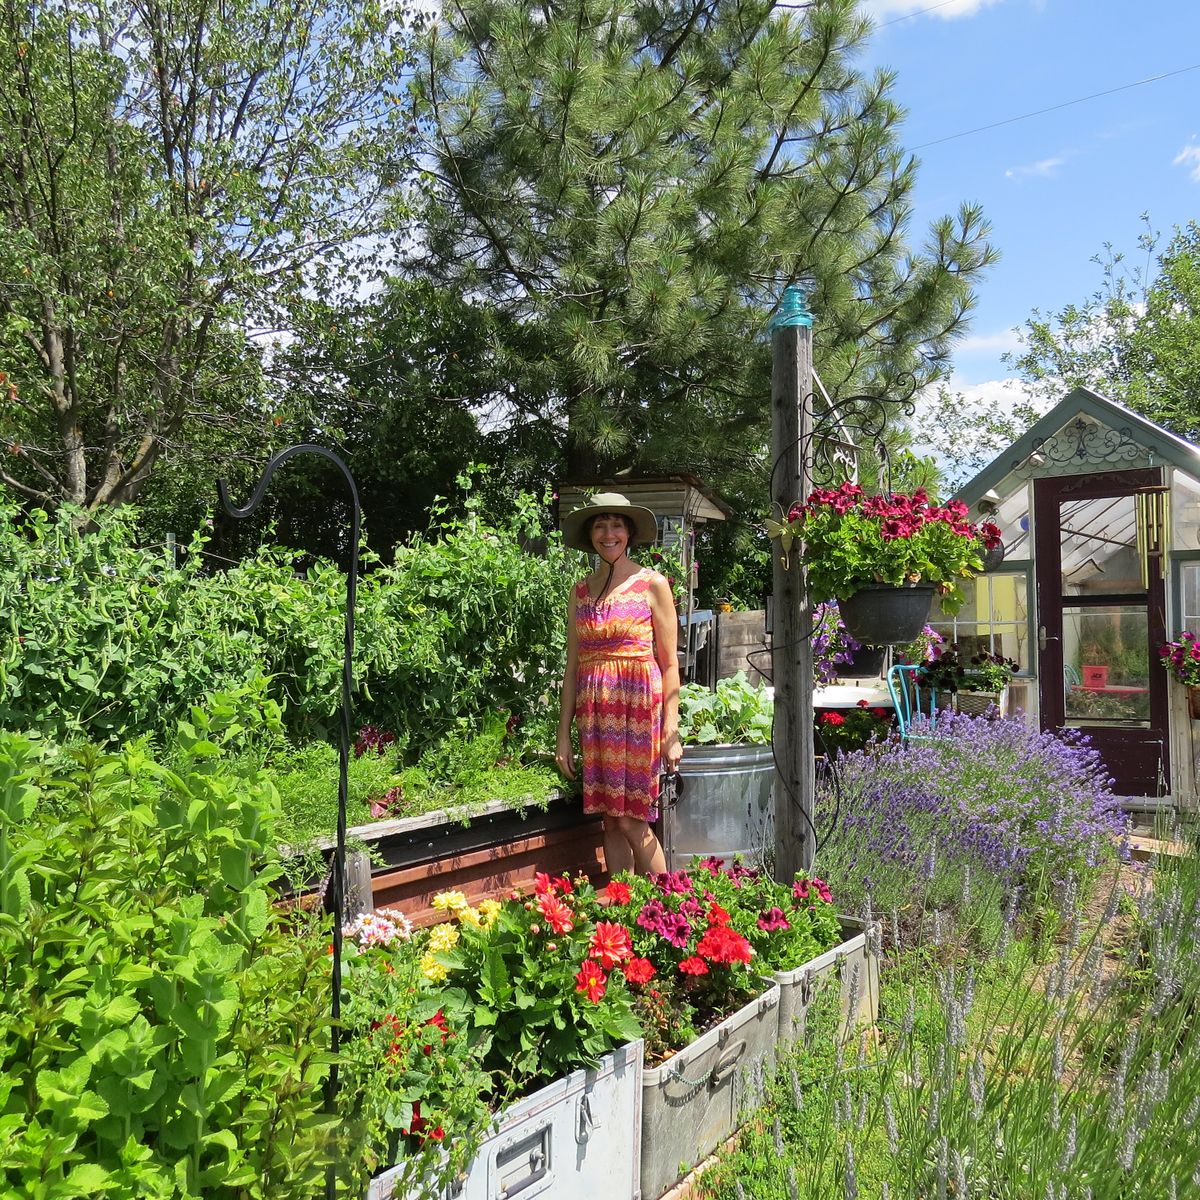 Marie Cole had to use her creativity in order to grow vegetables, herbs and flowers in her Green Bluff garden.  (Susan Mulvihill/For The Spokesman-Review)